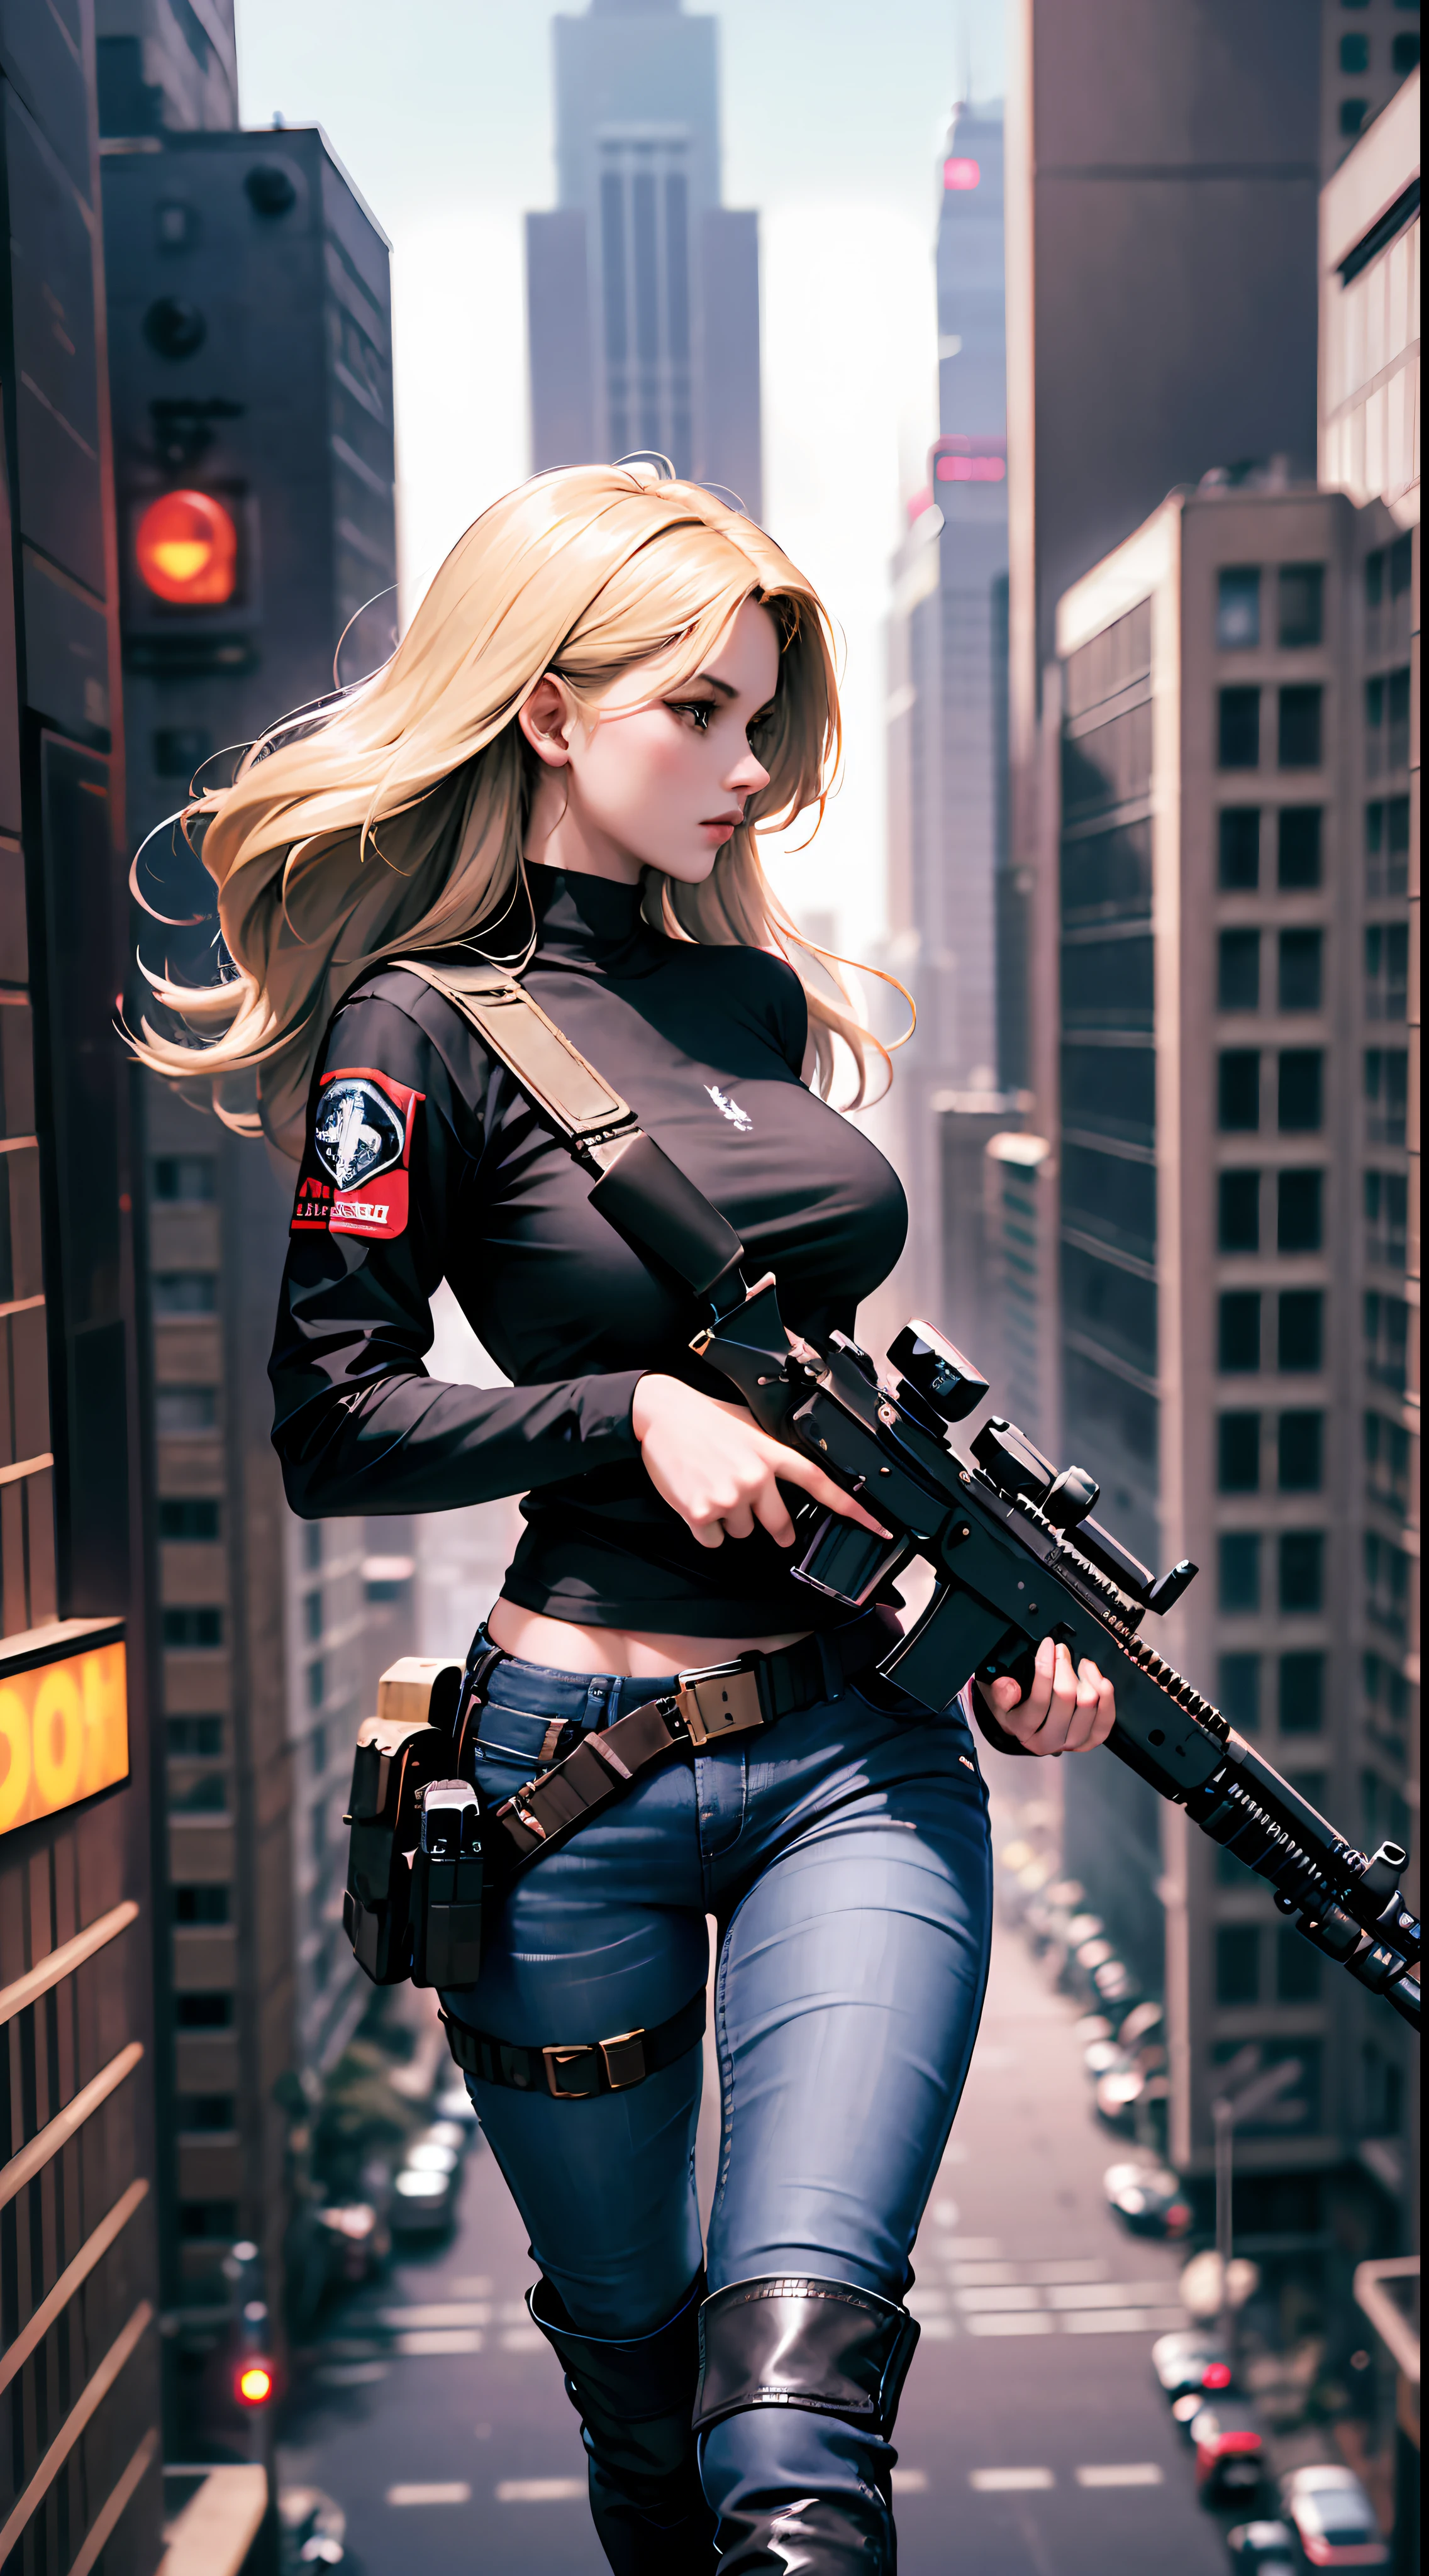 masterpiece, best_quality, 1girl, solo, aiming with sniper from the top of a building, gun with texture in high quality and detailed, long black t-shirt, long black jeans, military black boots, blonde hair, detailed perfect face, 4k, HDR, Full HD, HDR, cyberpunk dity at night, neon lights